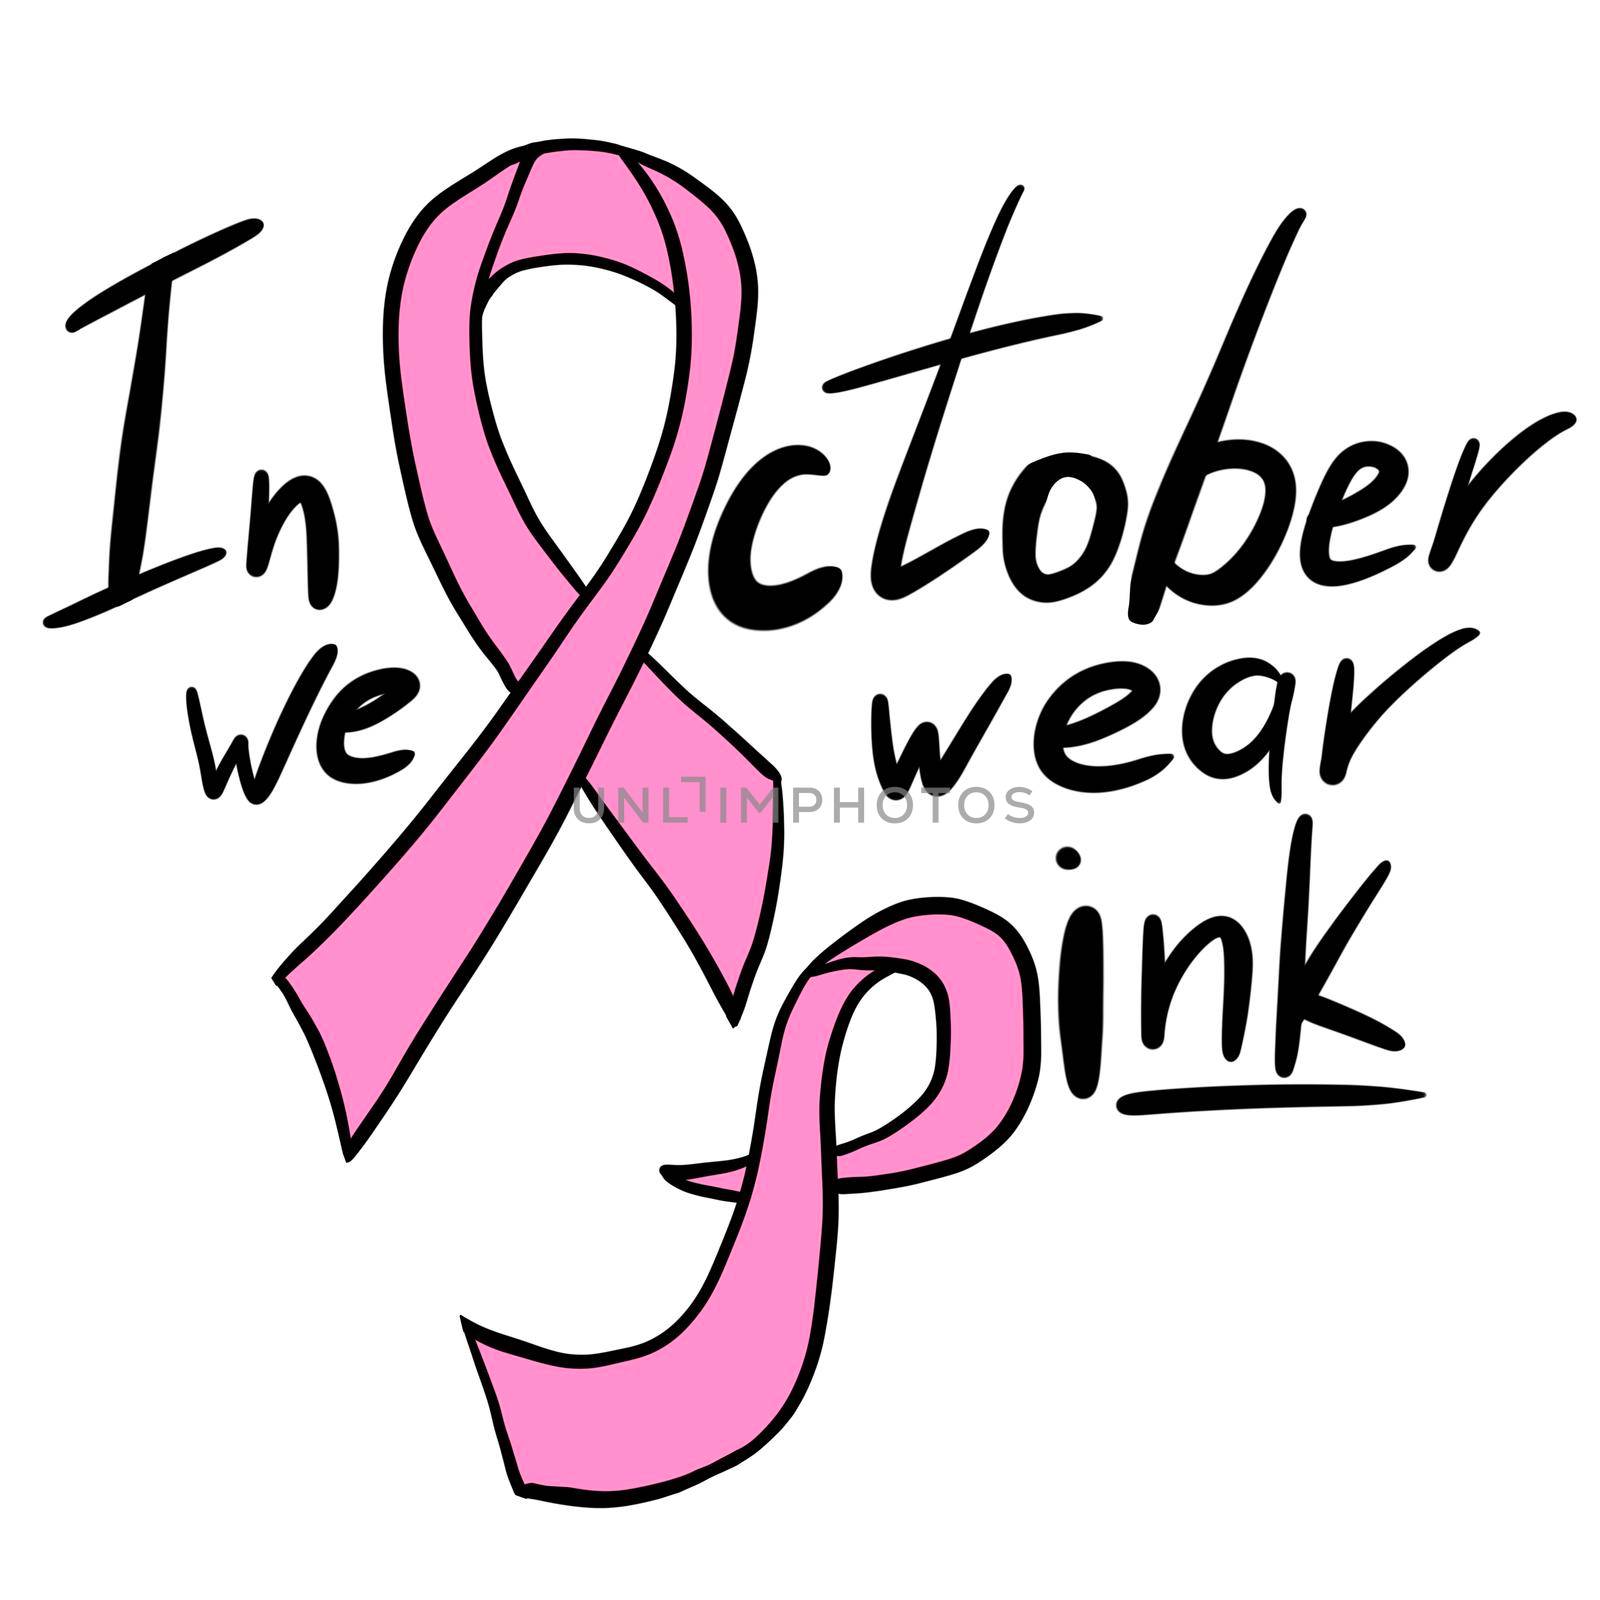 In October we wear pink. Breast cancer awareness month hand drawn illustration in black and pink. Disease illness ribbon for health protection, medical prevention concept. Women's healthcare design. by Lagmar